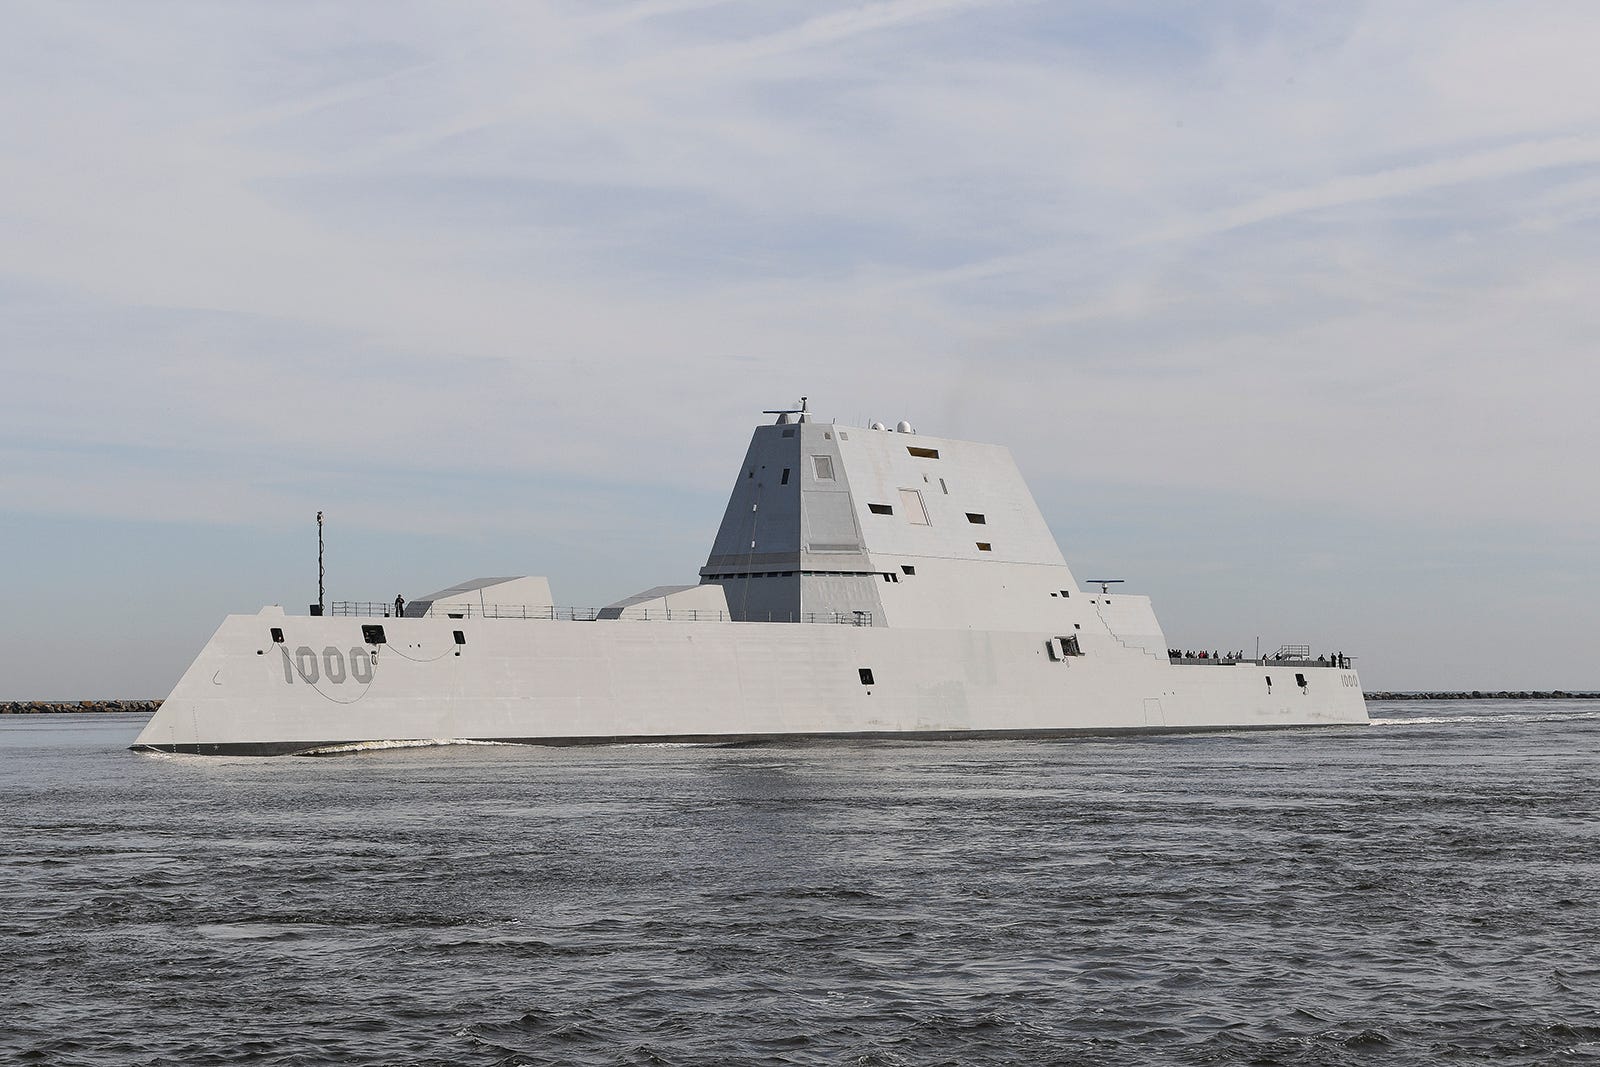 Zumwalt Destroyers May Not Have Ammo For Their Guns, But They'll Soon Have Hypersonic Missiles